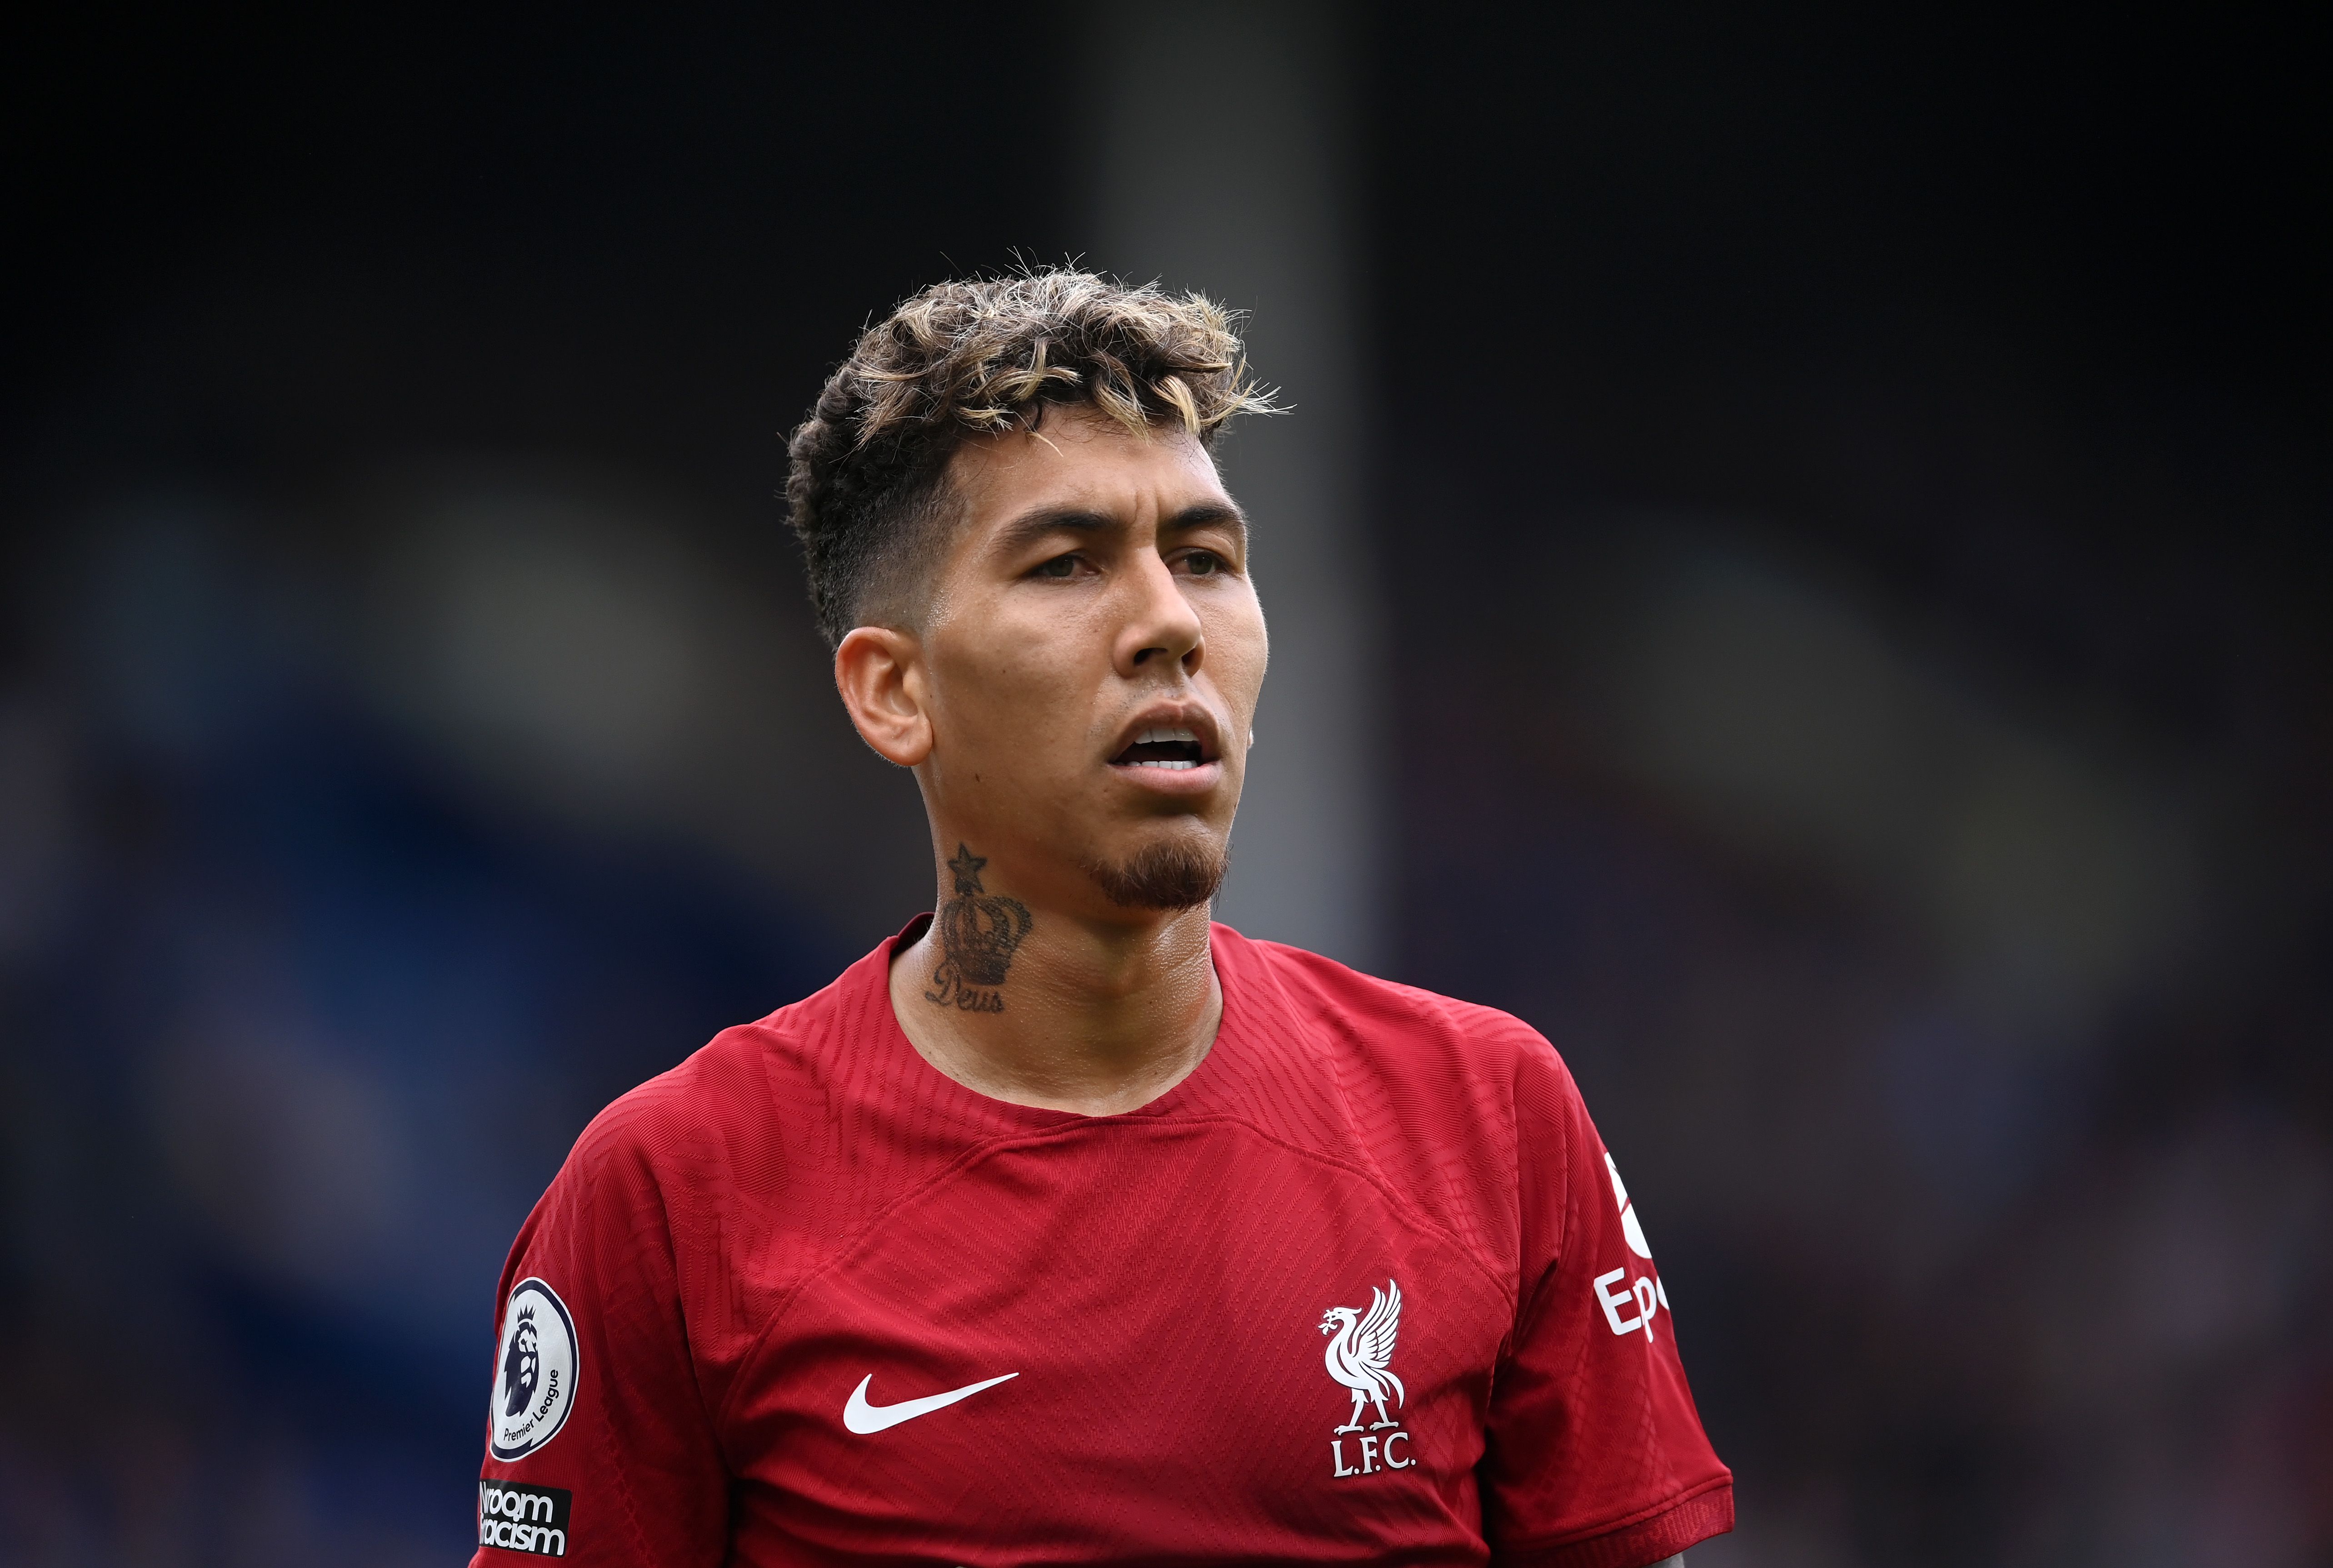 Roberto Firmino of Liverpool looks on during the Premier League match